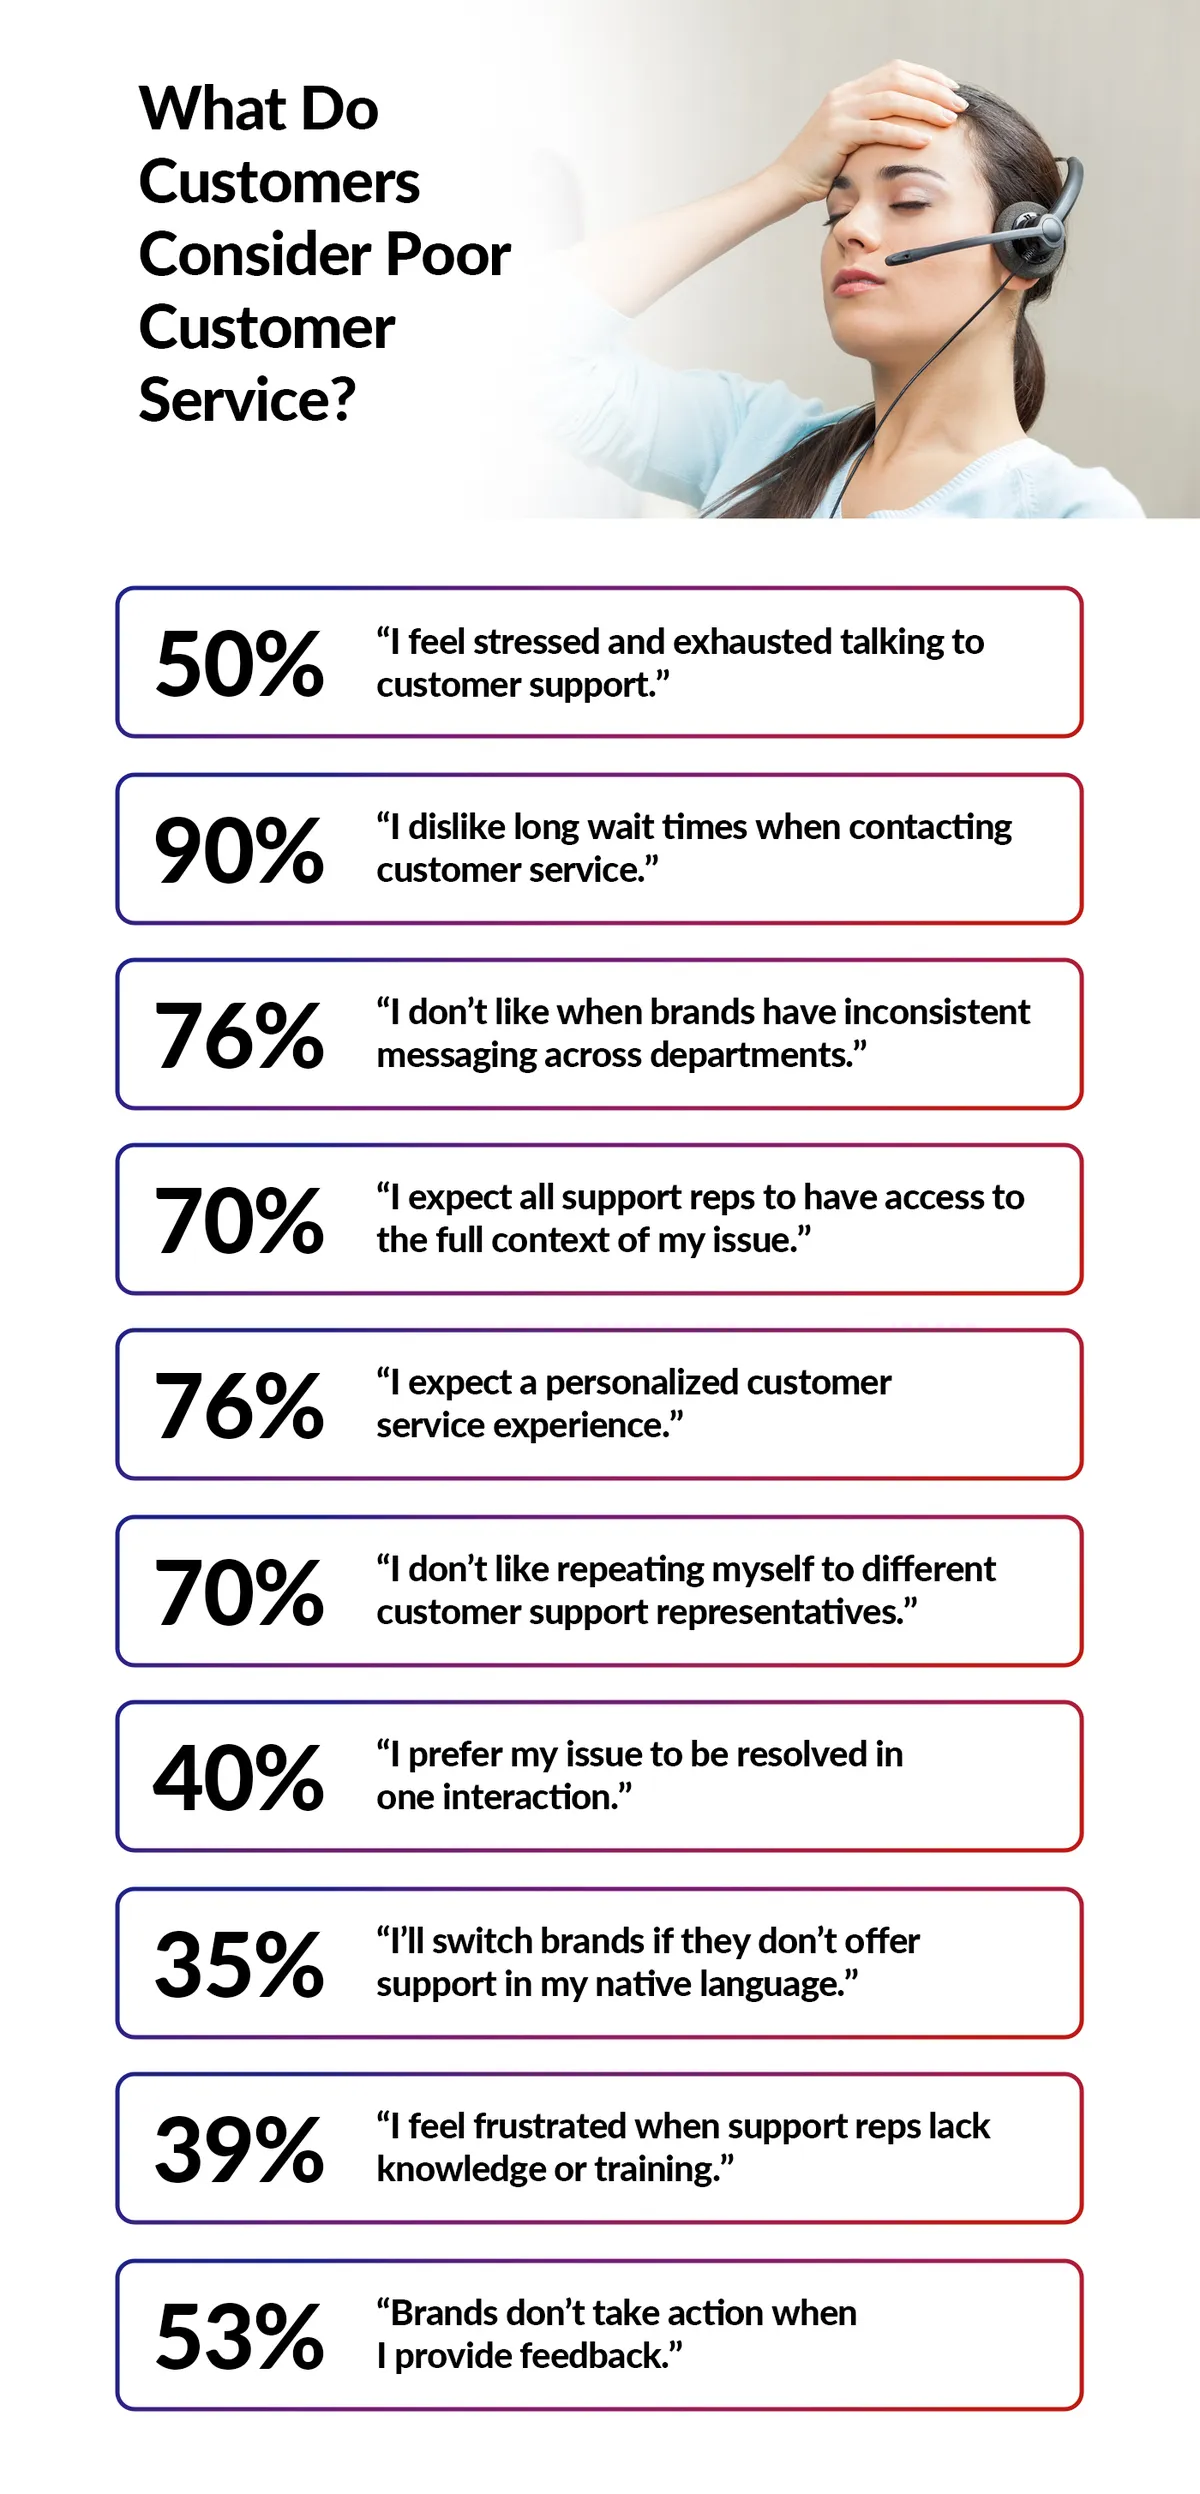 An infographic showing what customers consider poor customer service.